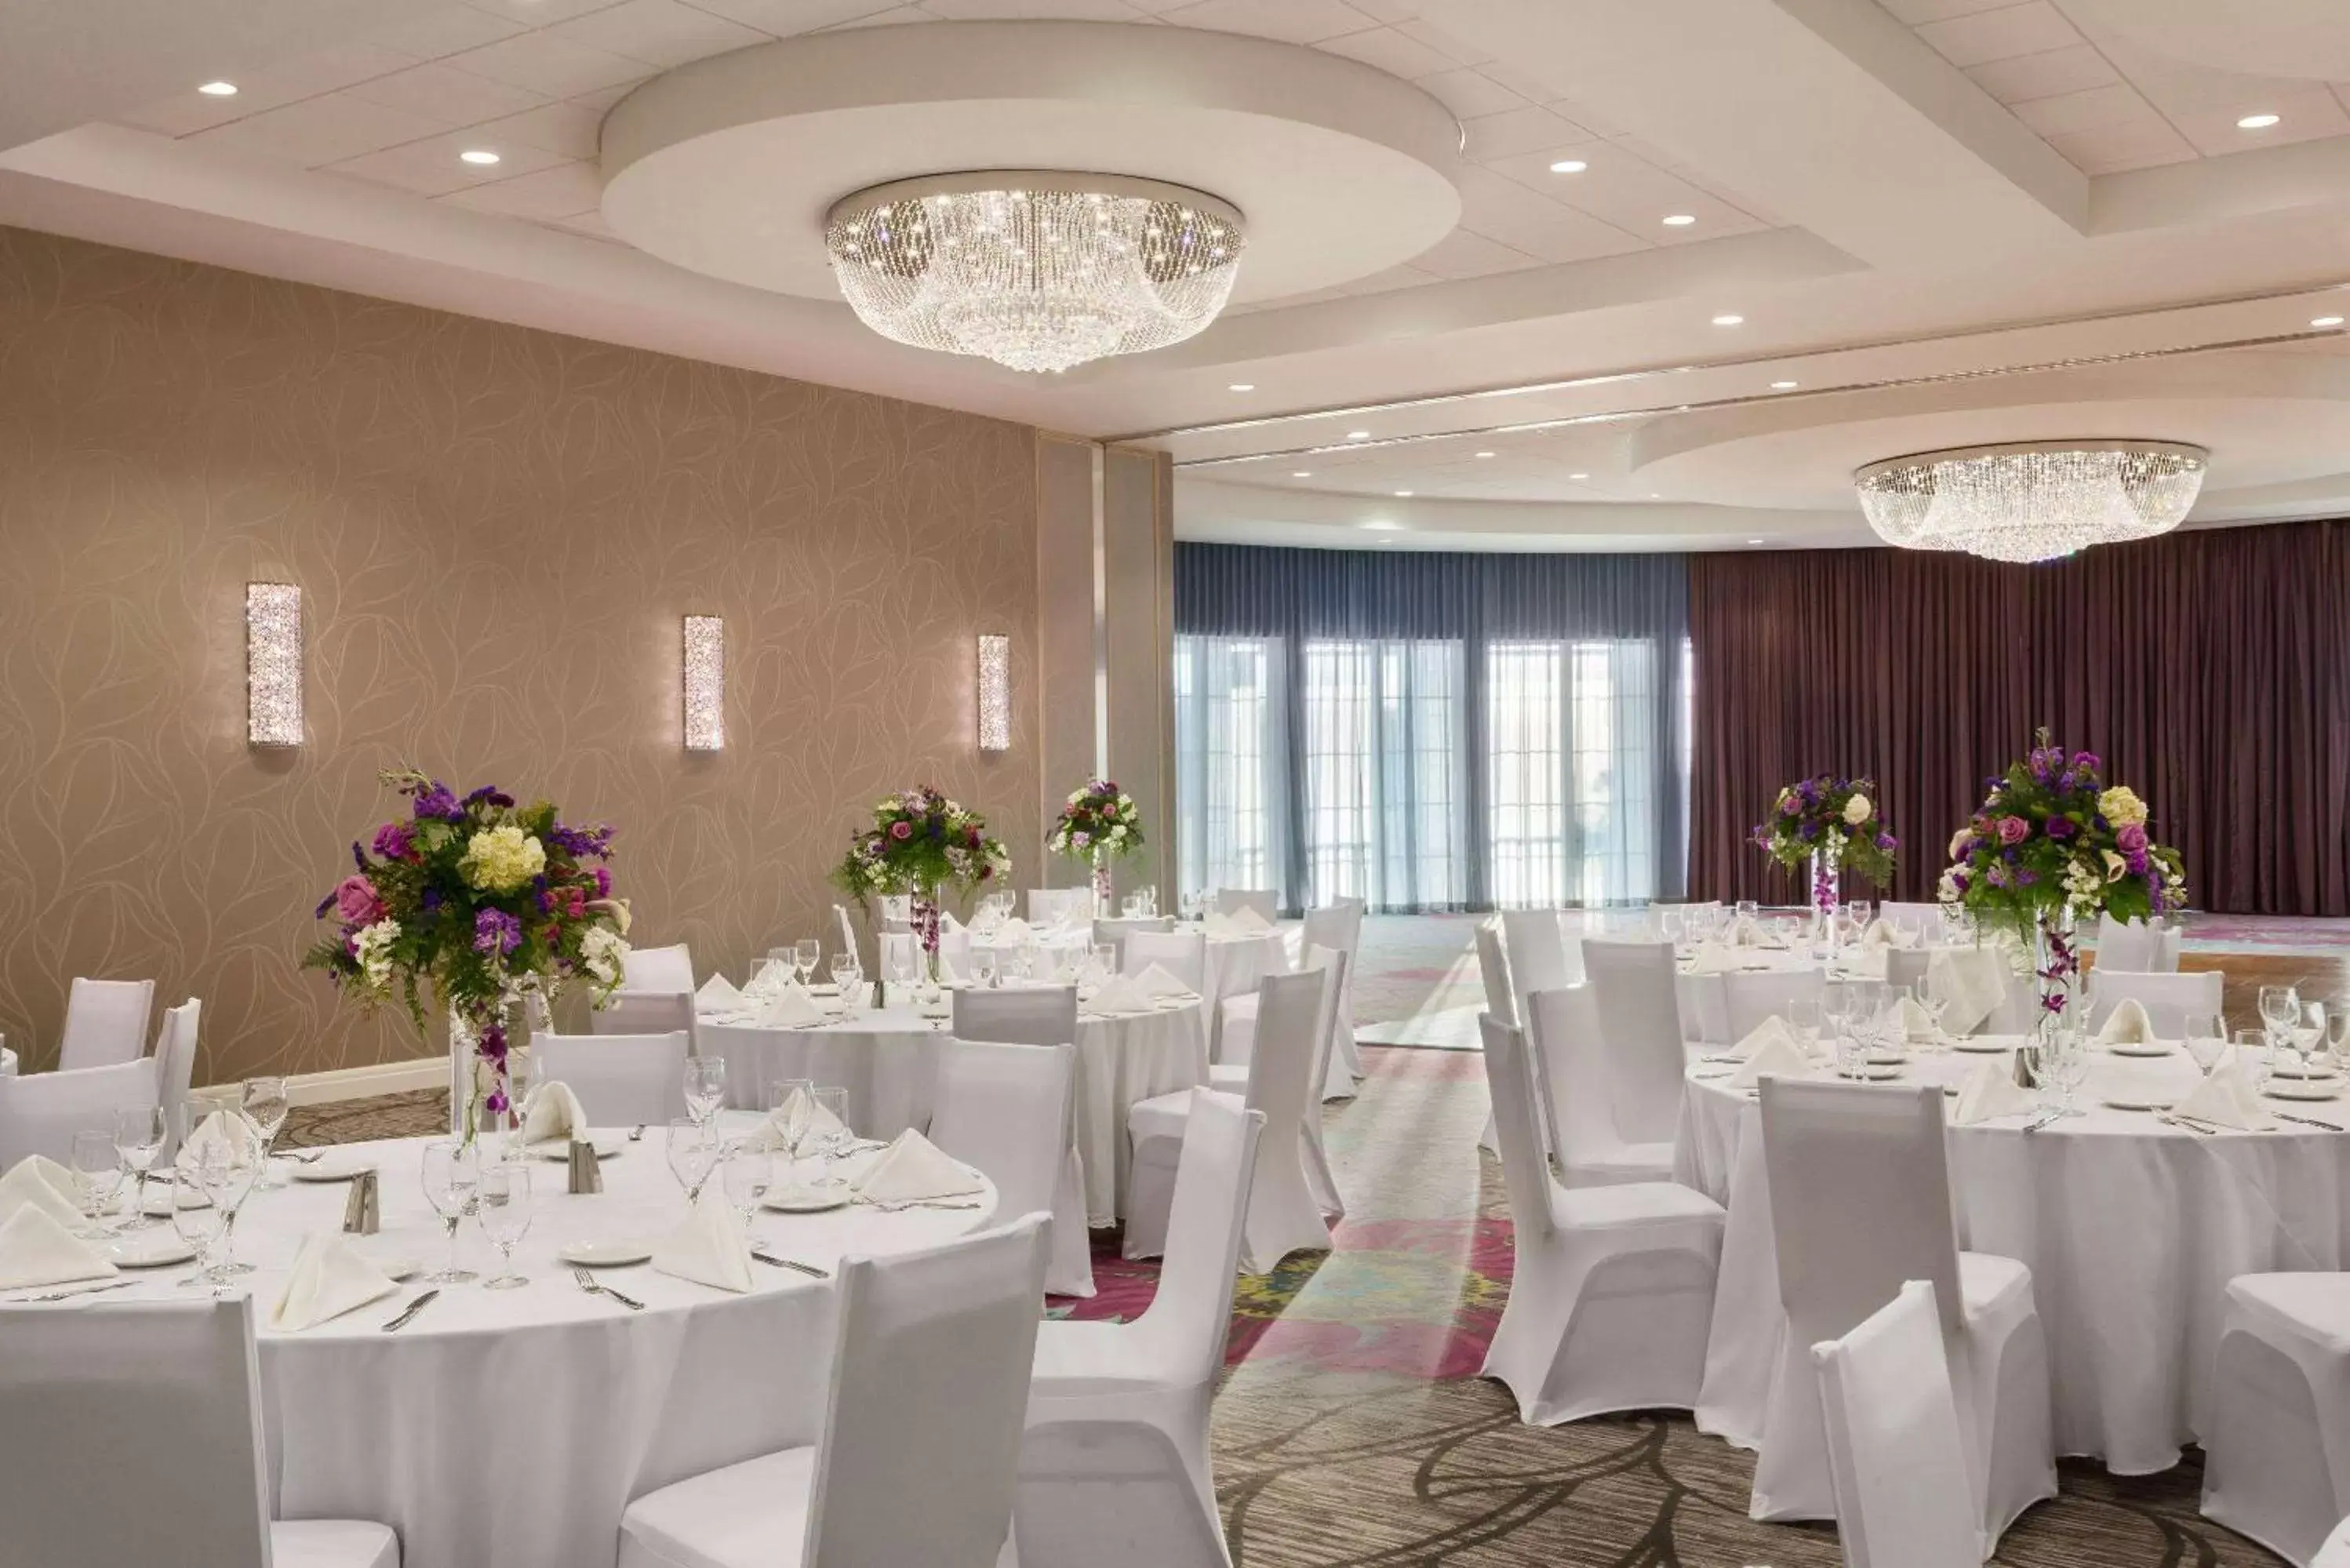 Banquet/Function facilities, Banquet Facilities in Wyndham Grand Jupiter at Harbourside Place